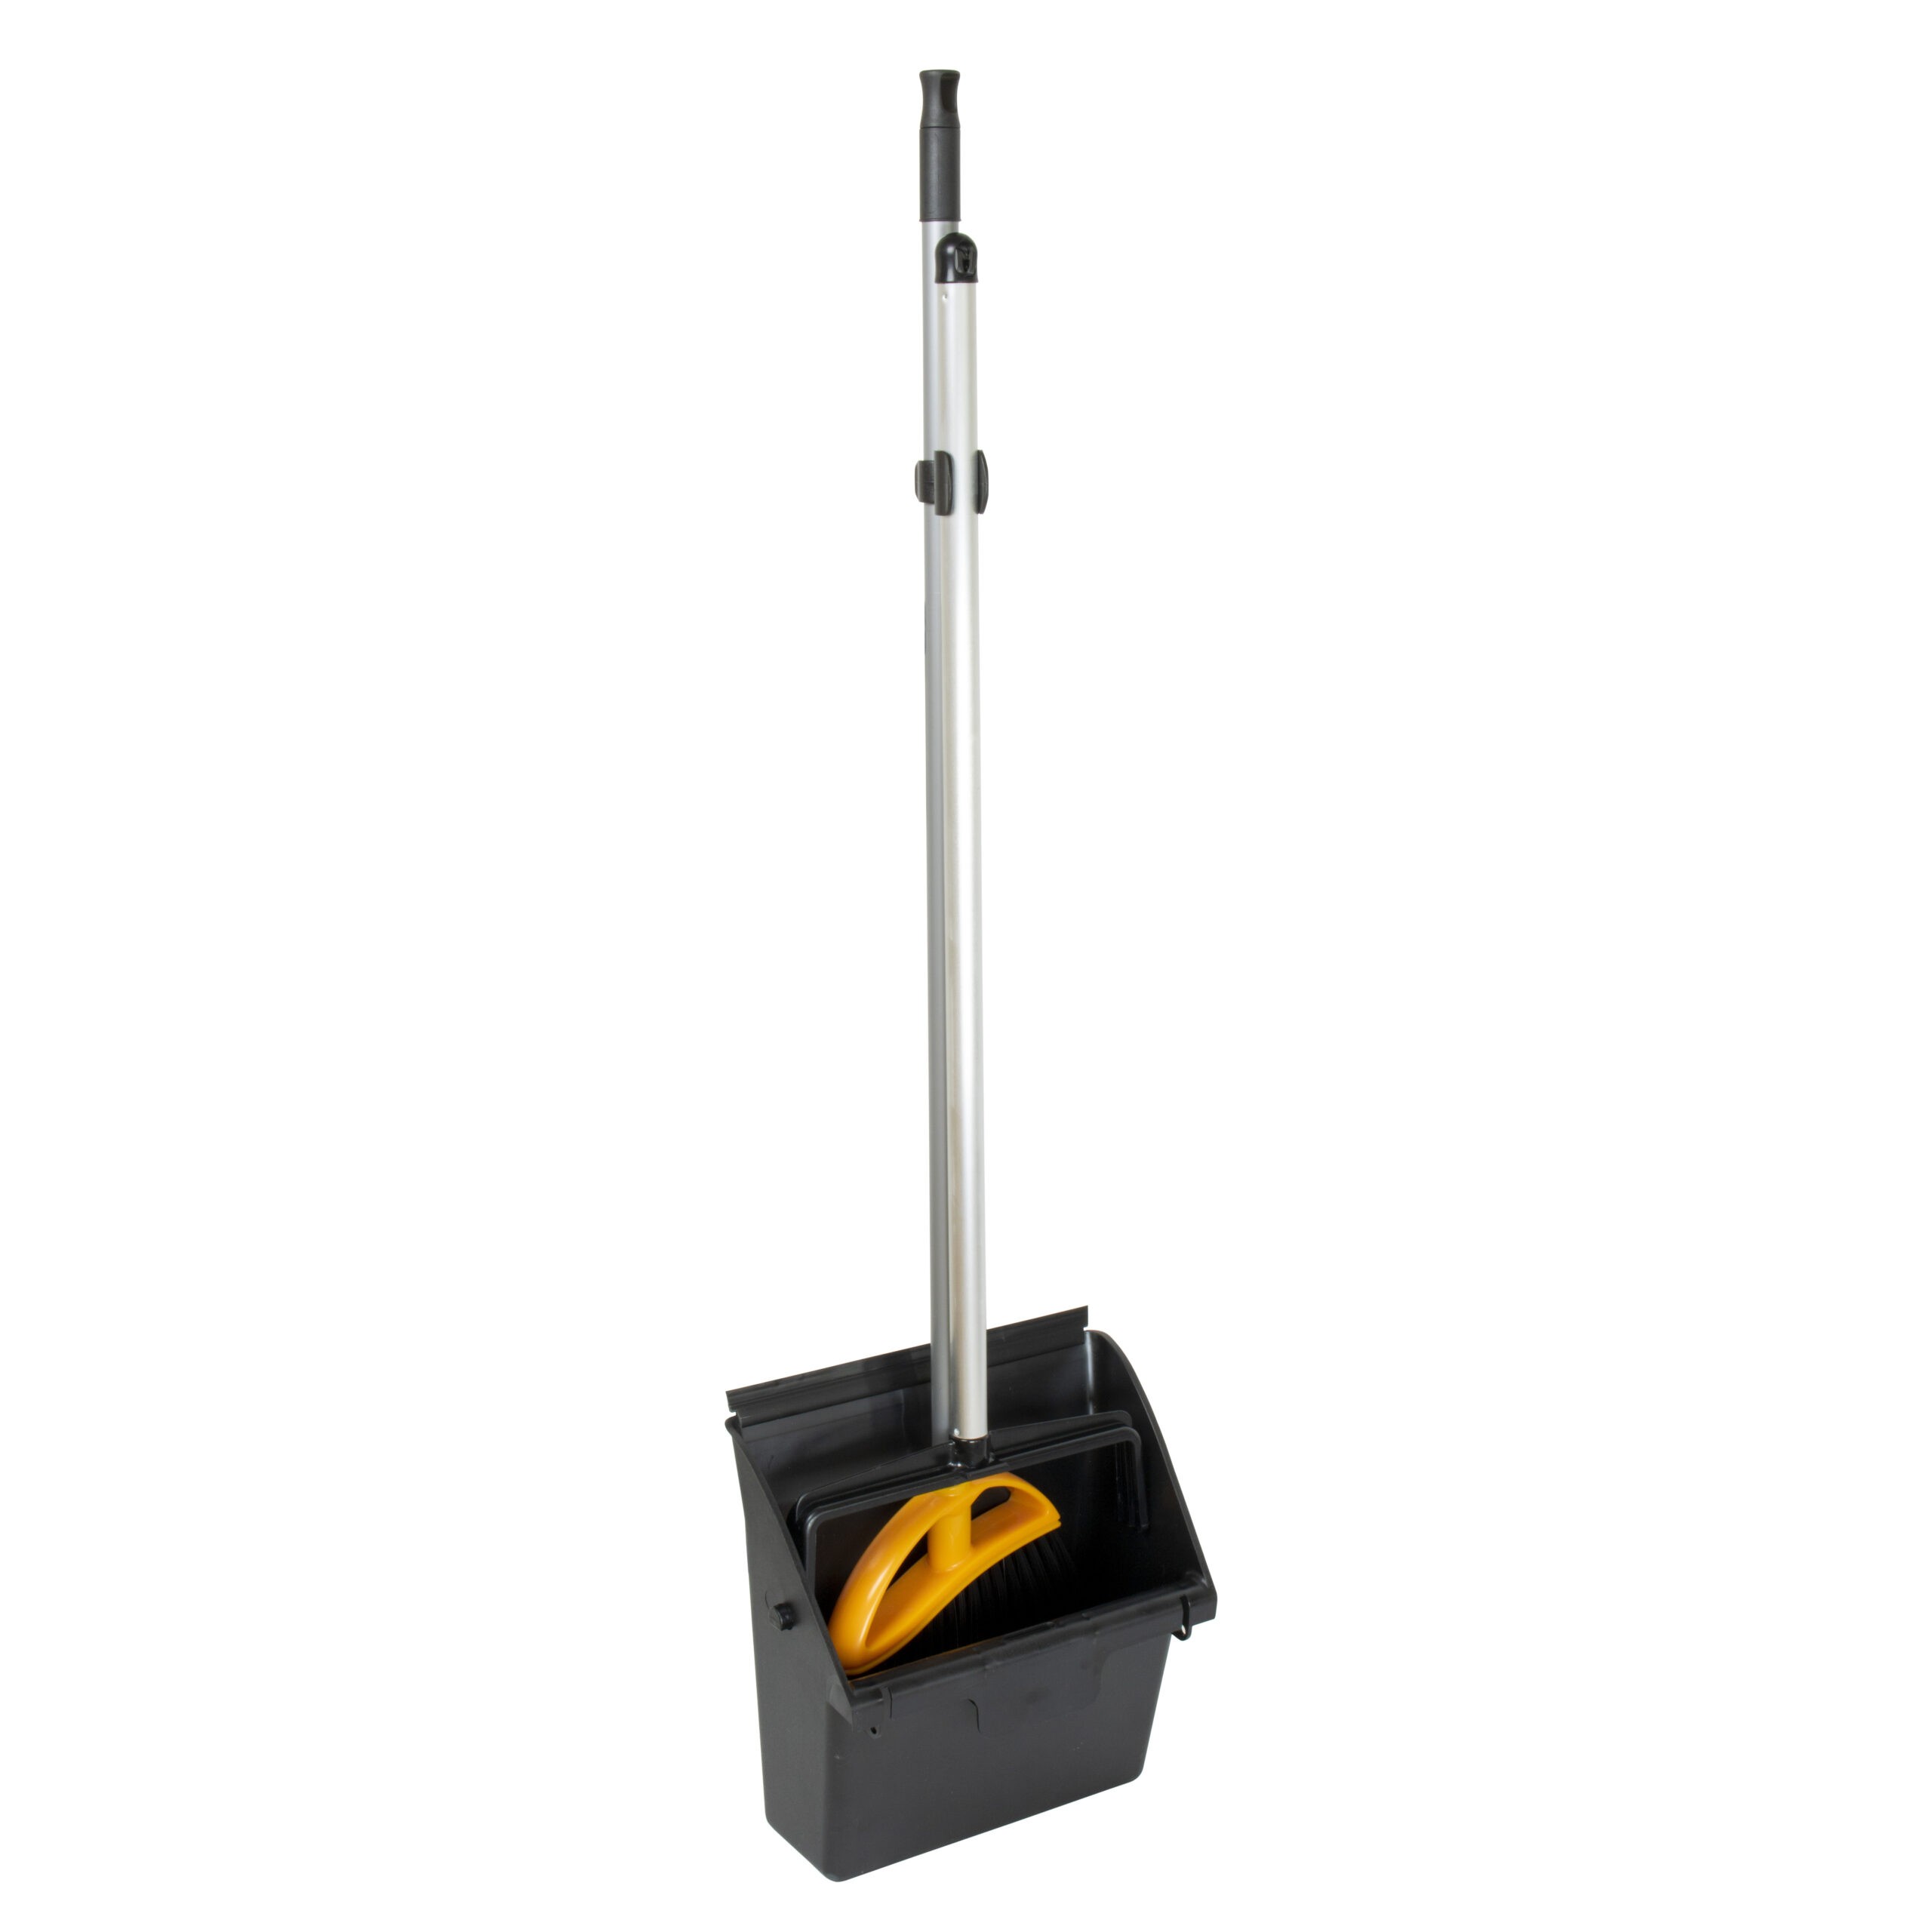 Igeax waste collection bucket with handle and broom